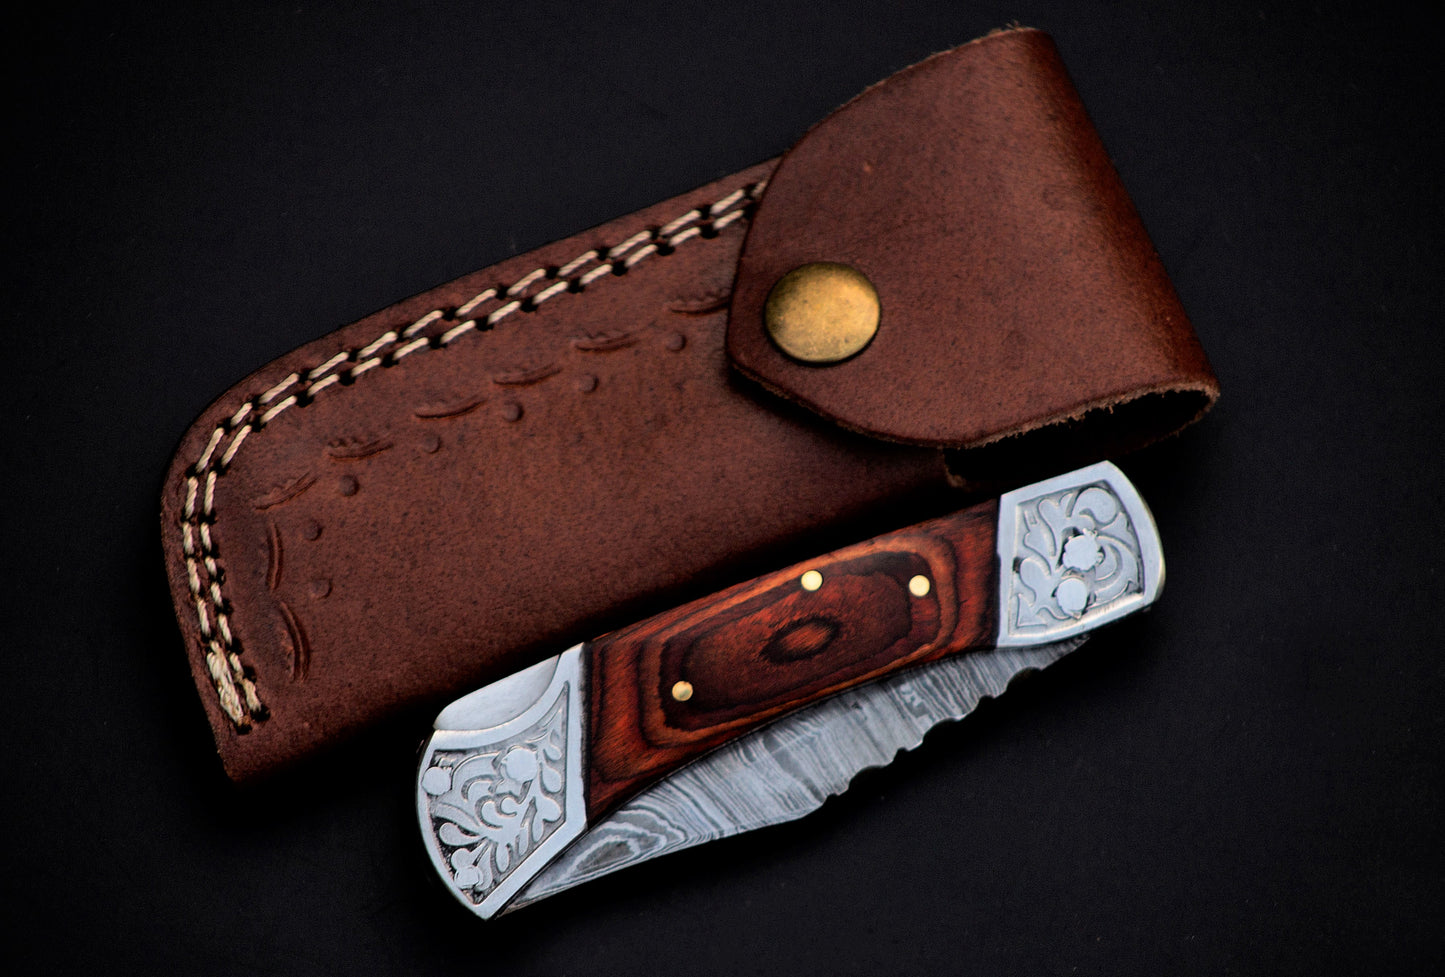 7" long back lock Folding Knife, Rose wood Scale with Engraved steel bolster, custom made 3.25" Hand Forged Damascus steel blade, Cow hide leather sheath with belt loop